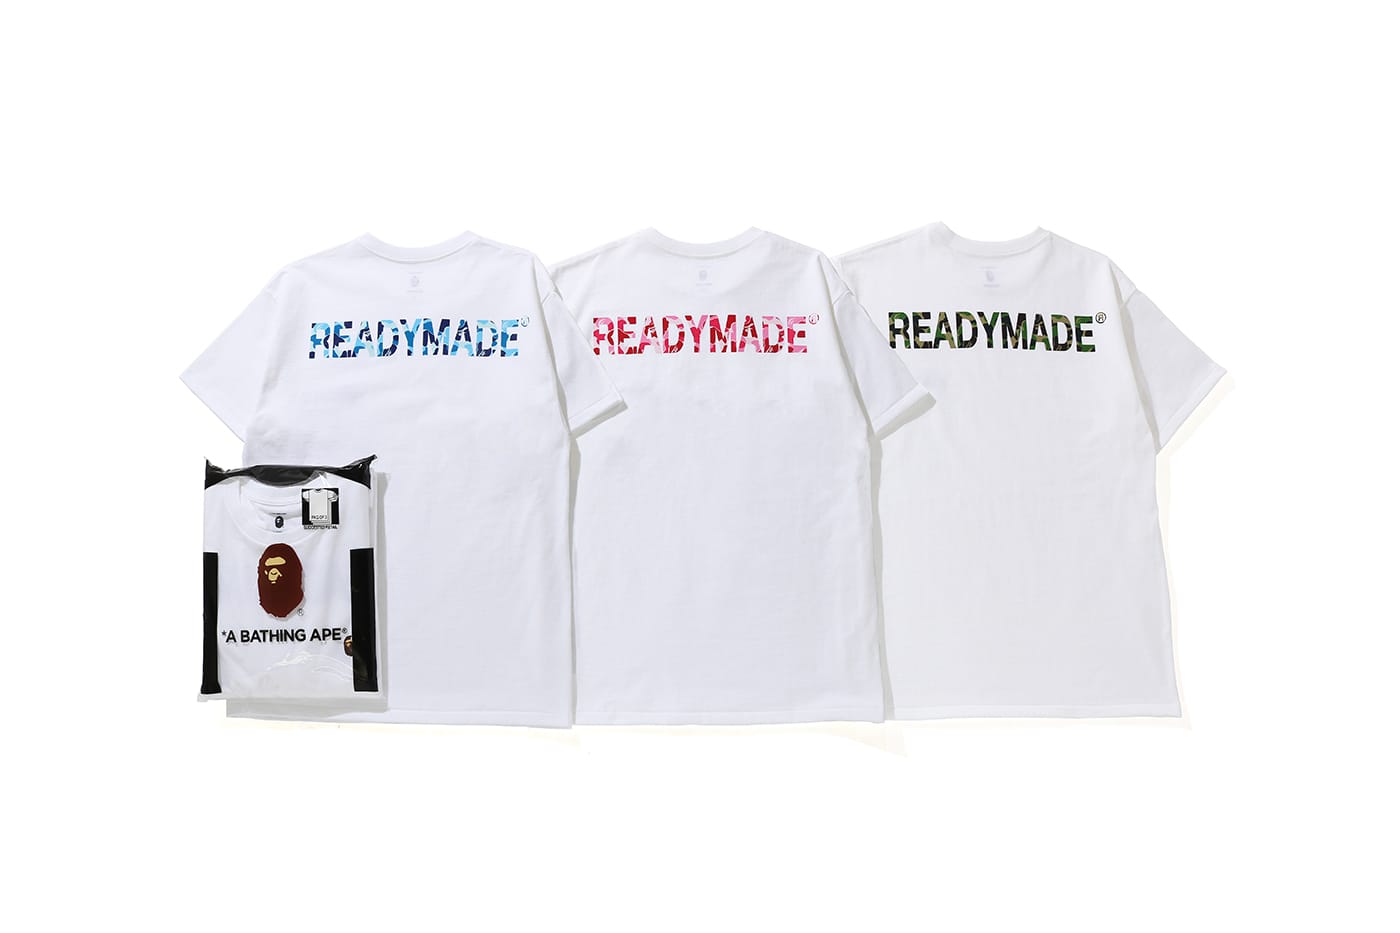 READYMADE x BAPE Collection Release | Hypebeast